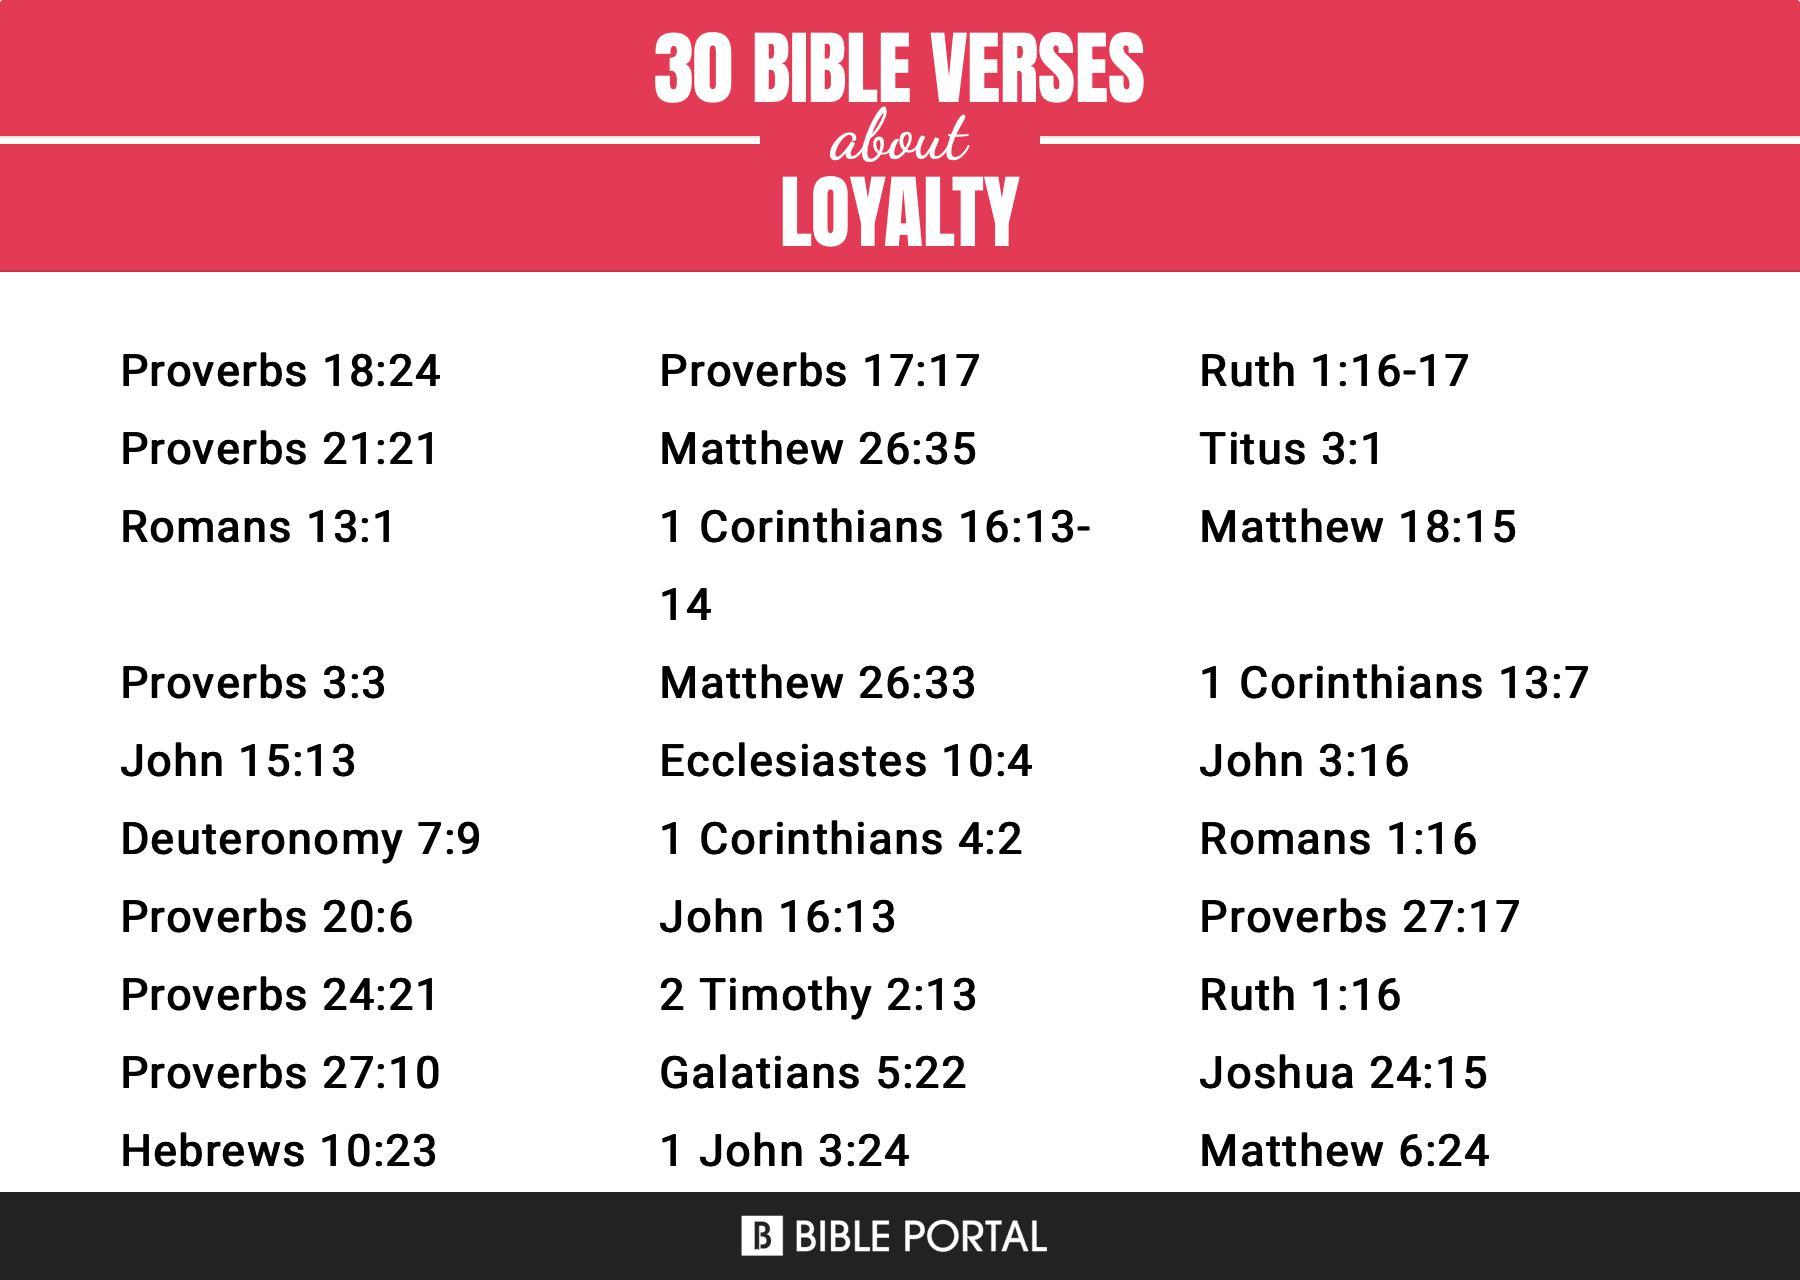 What Does the Bible Say about Loyalty?